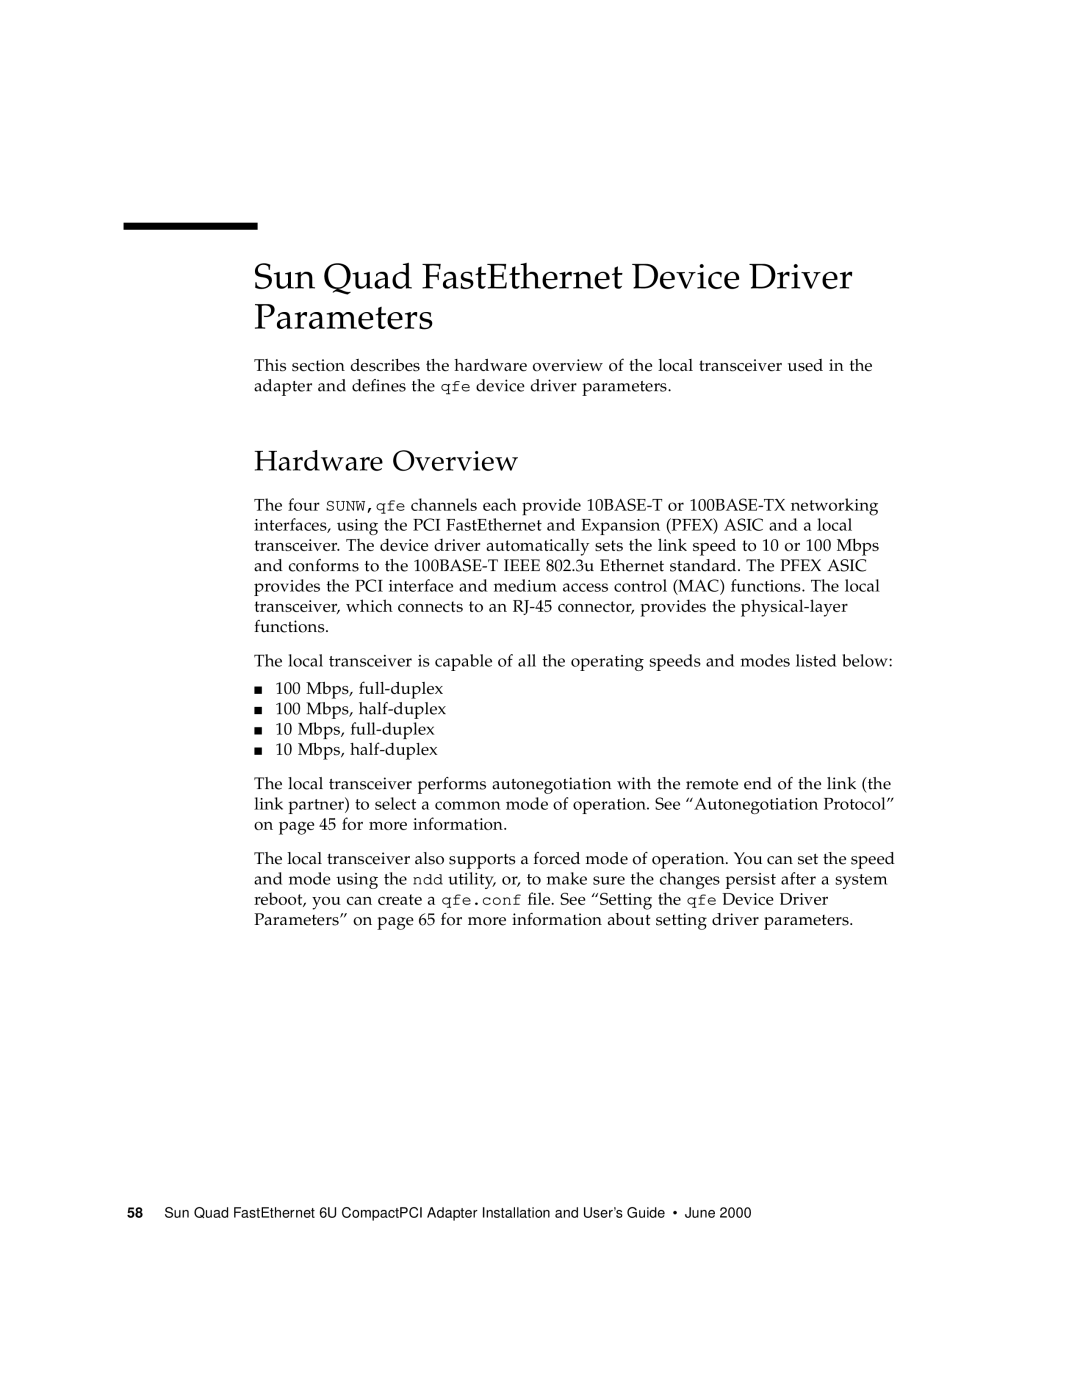 Sun Microsystems 6U manual Sun Quad FastEthernet Device Driver Parameters, Hardware Overview 